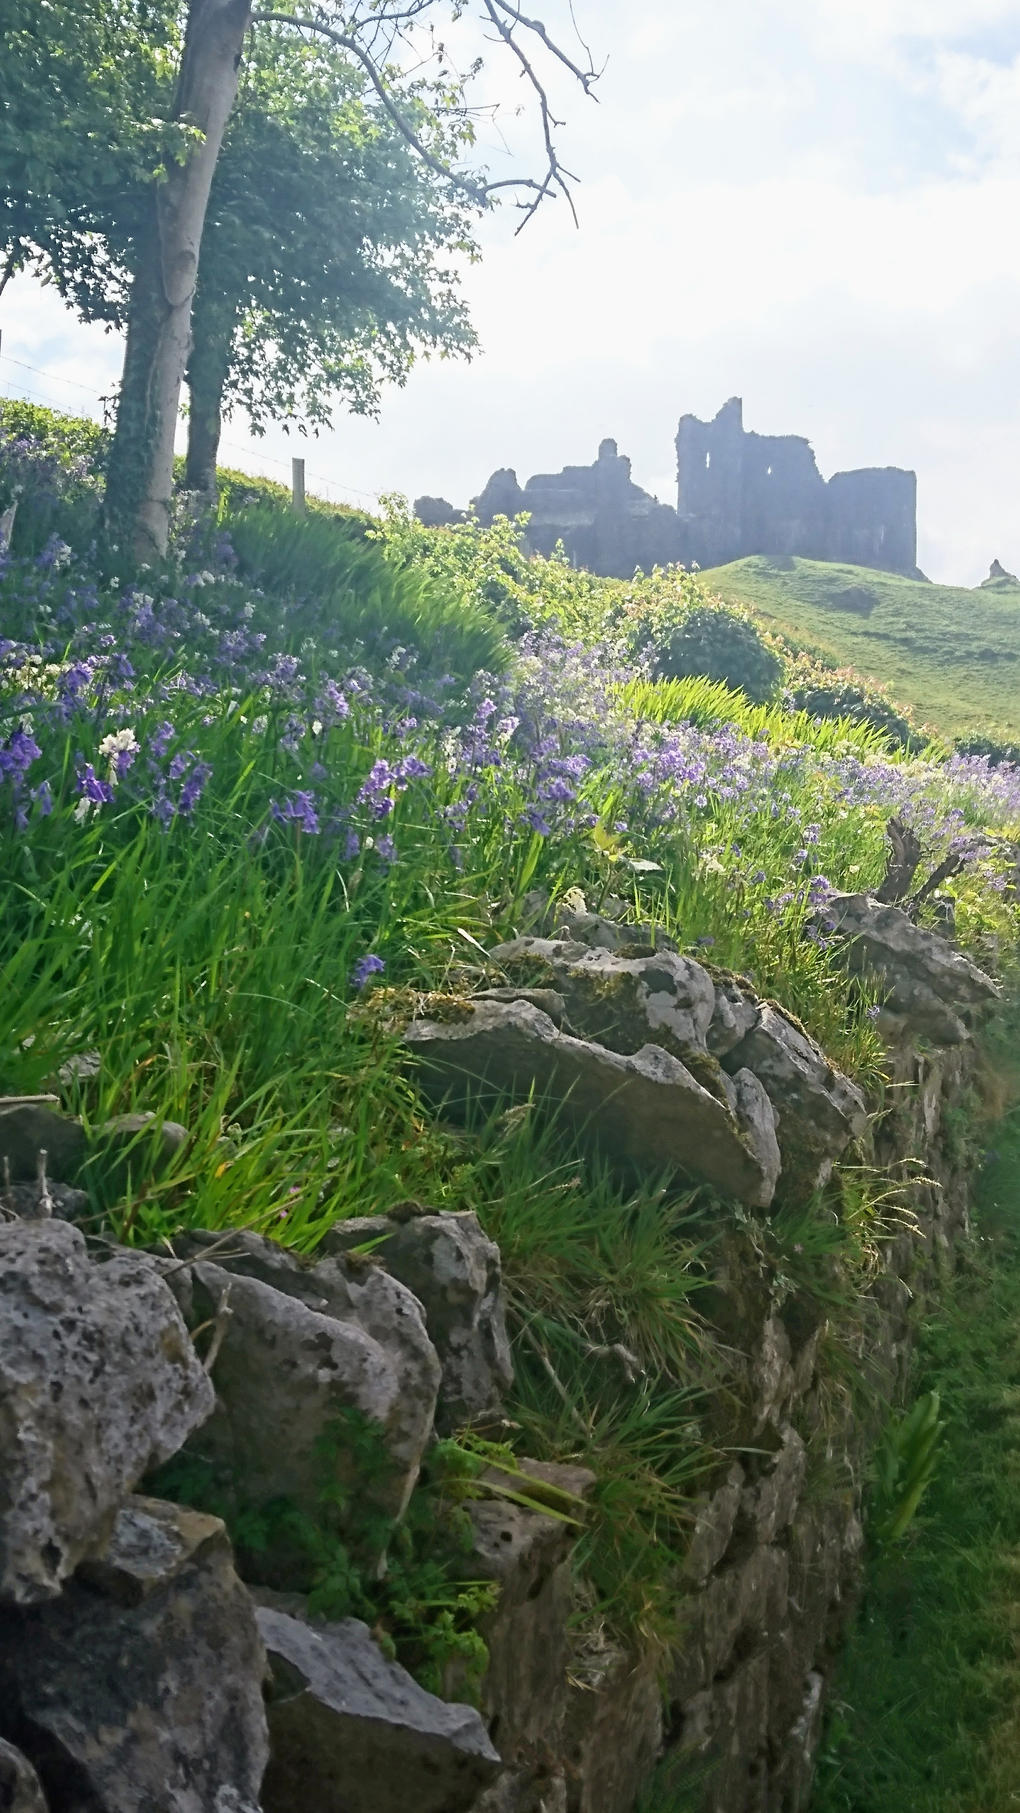 Upon visiting a castle ruin in Wales i took this photo showing a bank of late bluebells at the top of a lovely old dry stone wall, with a view of the castle ruin looming through the heat haze looking faintly there. It was too hot to brave the steep climb to the castle, so a look from below had to suffice. Next stop an ice-cream parlour!